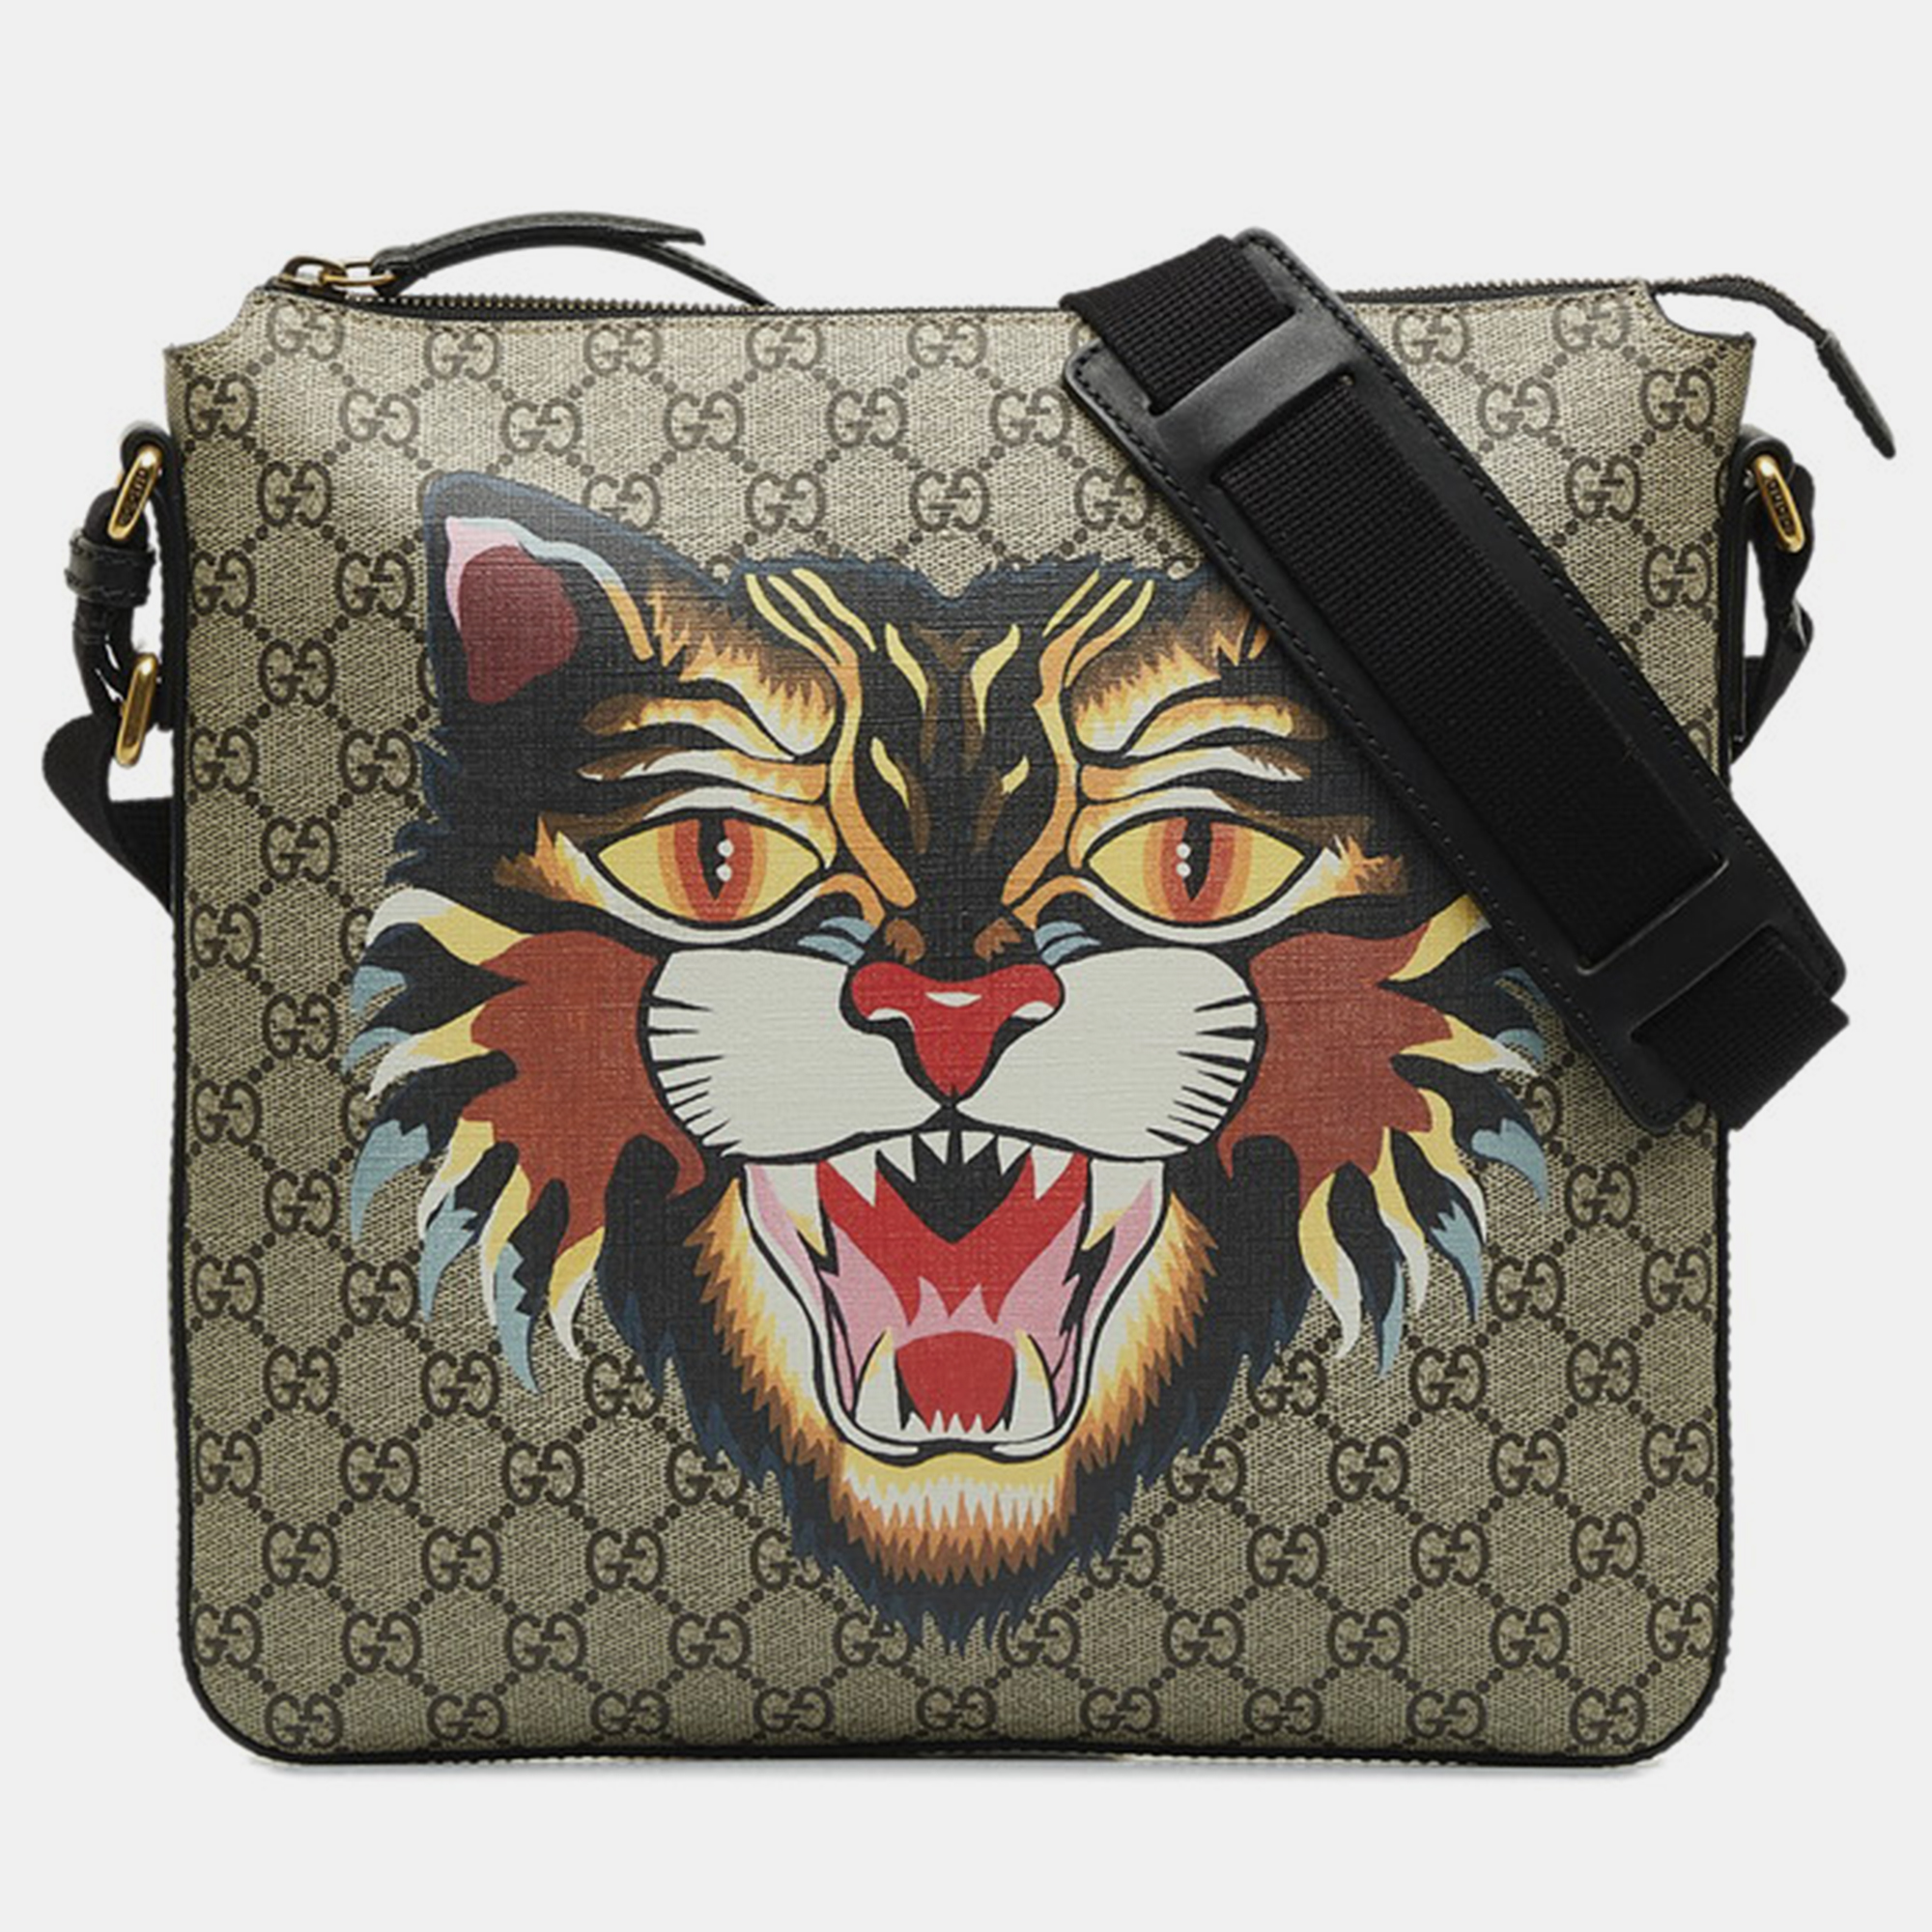 Gucci Beige Canvas GG Supreme Angry Cat Messenger Bag